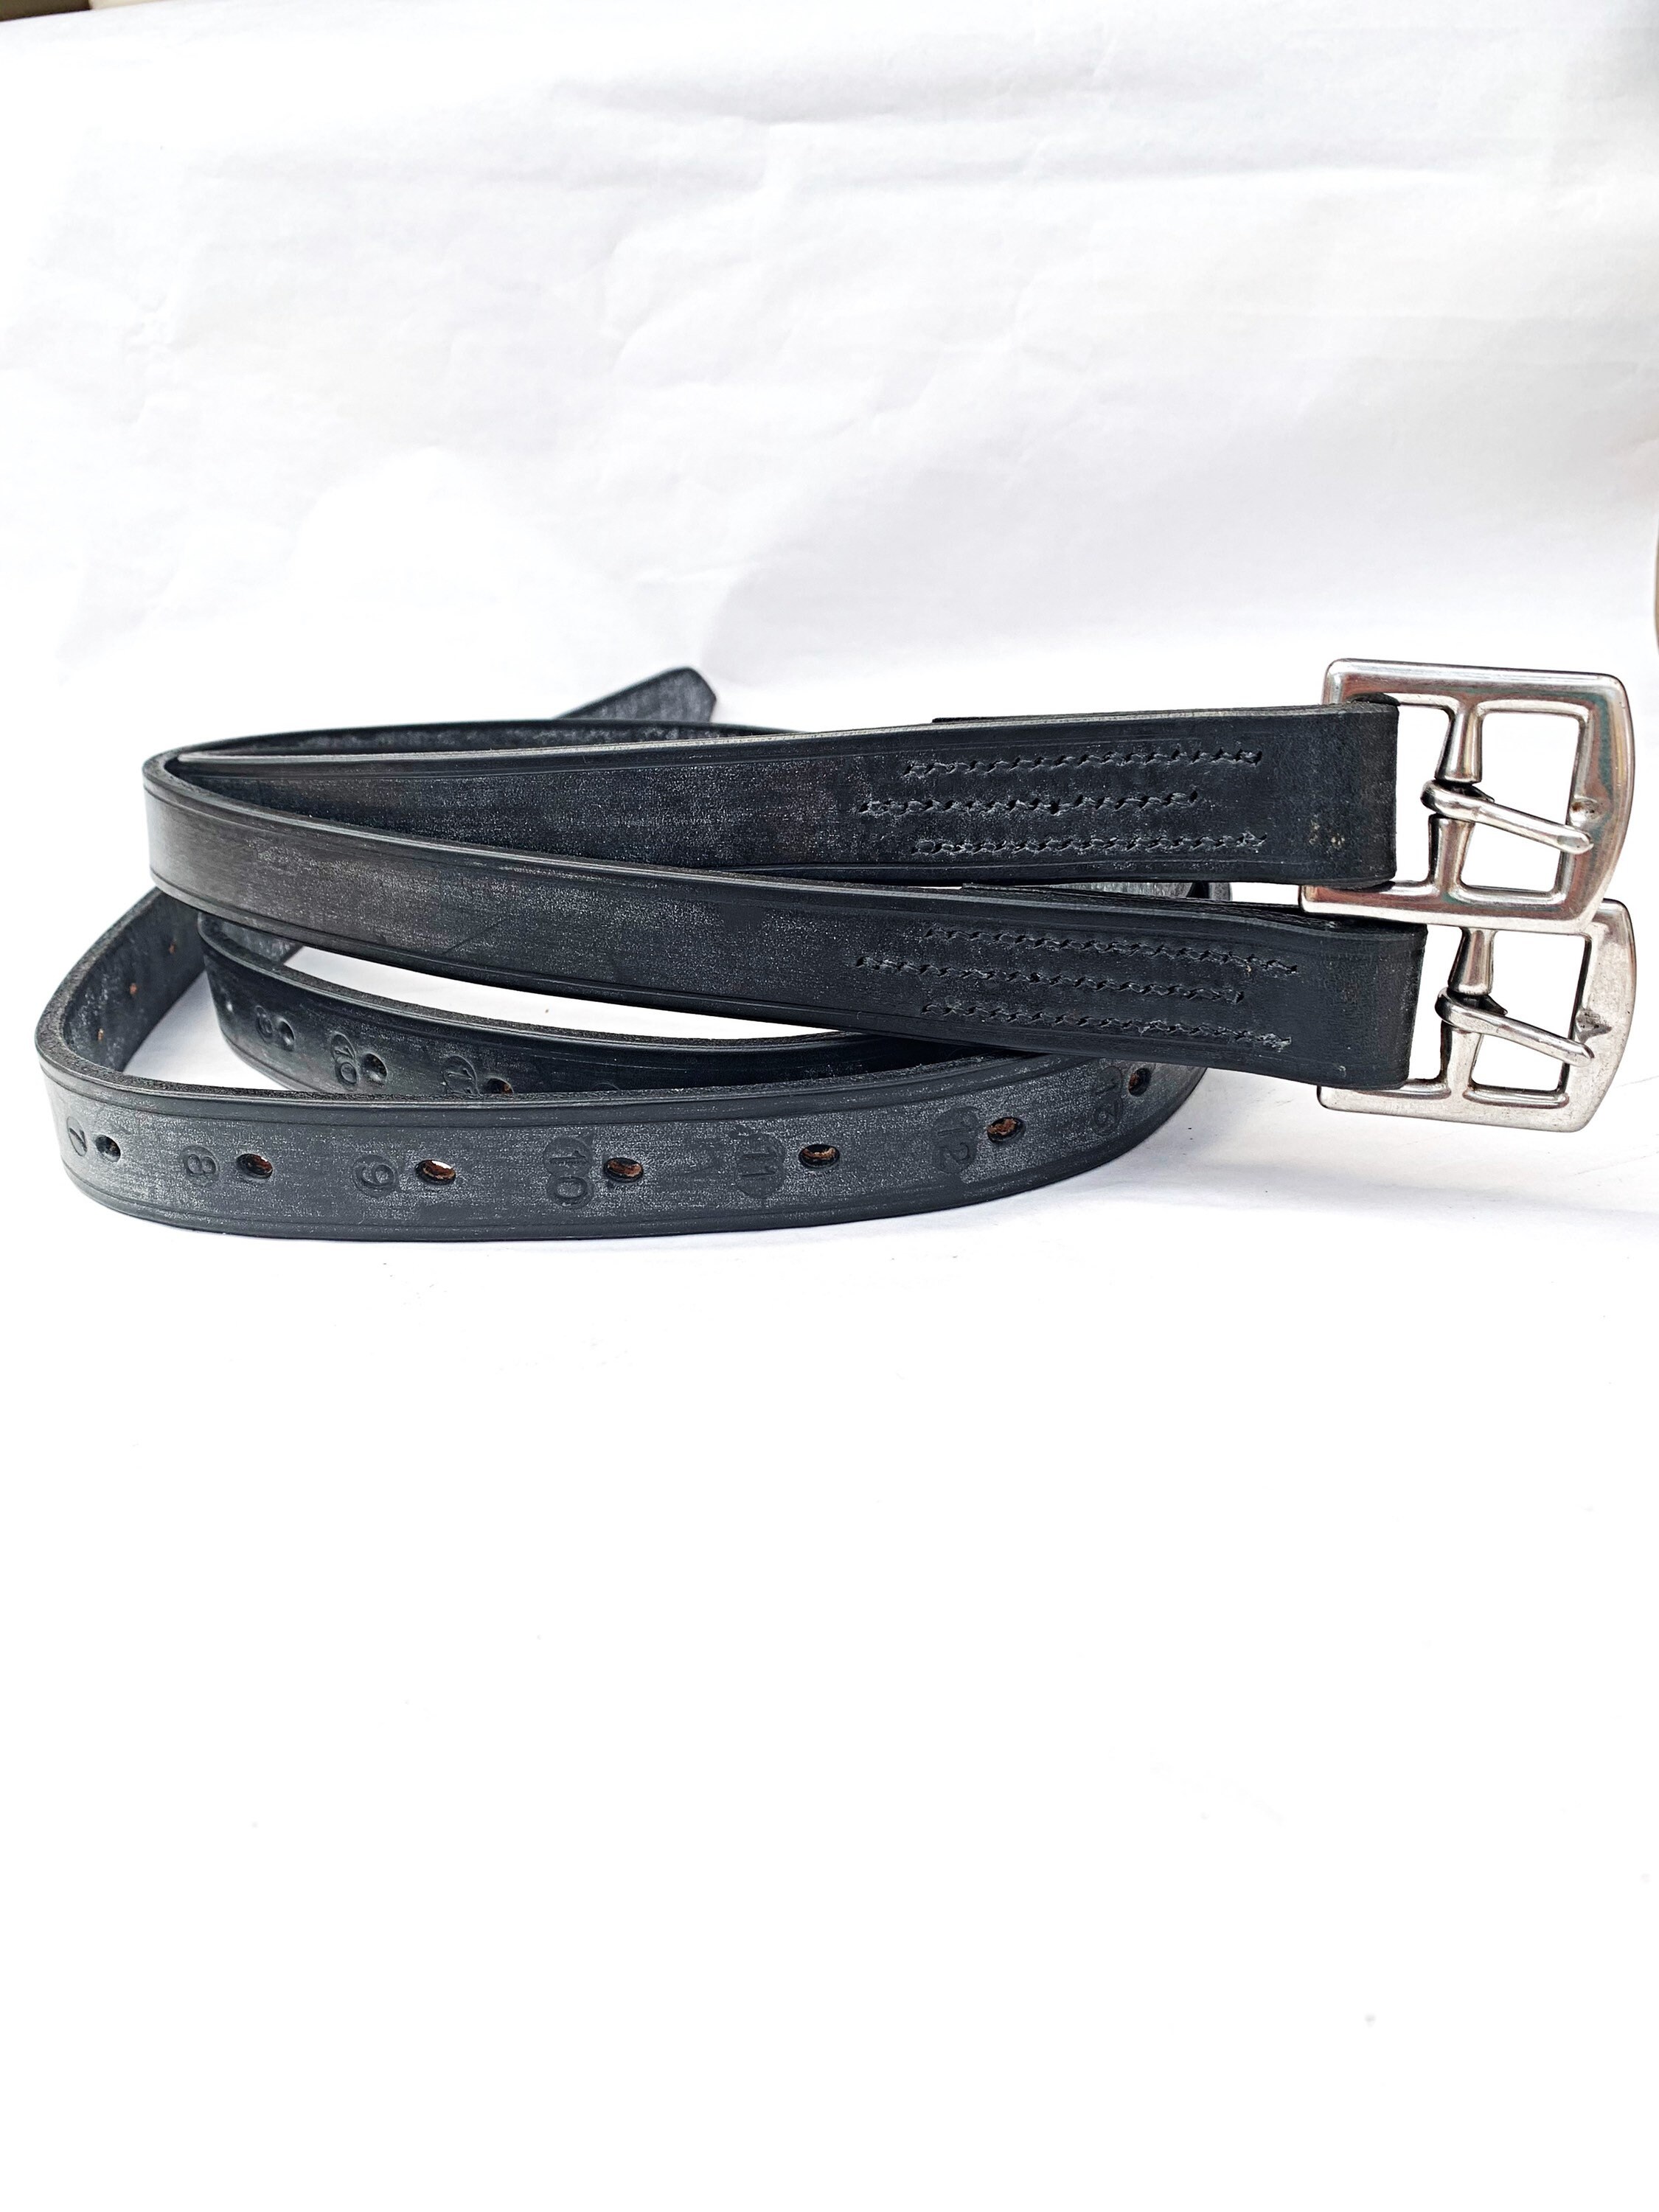 Buy Stirrup Leathers Online In India -  India